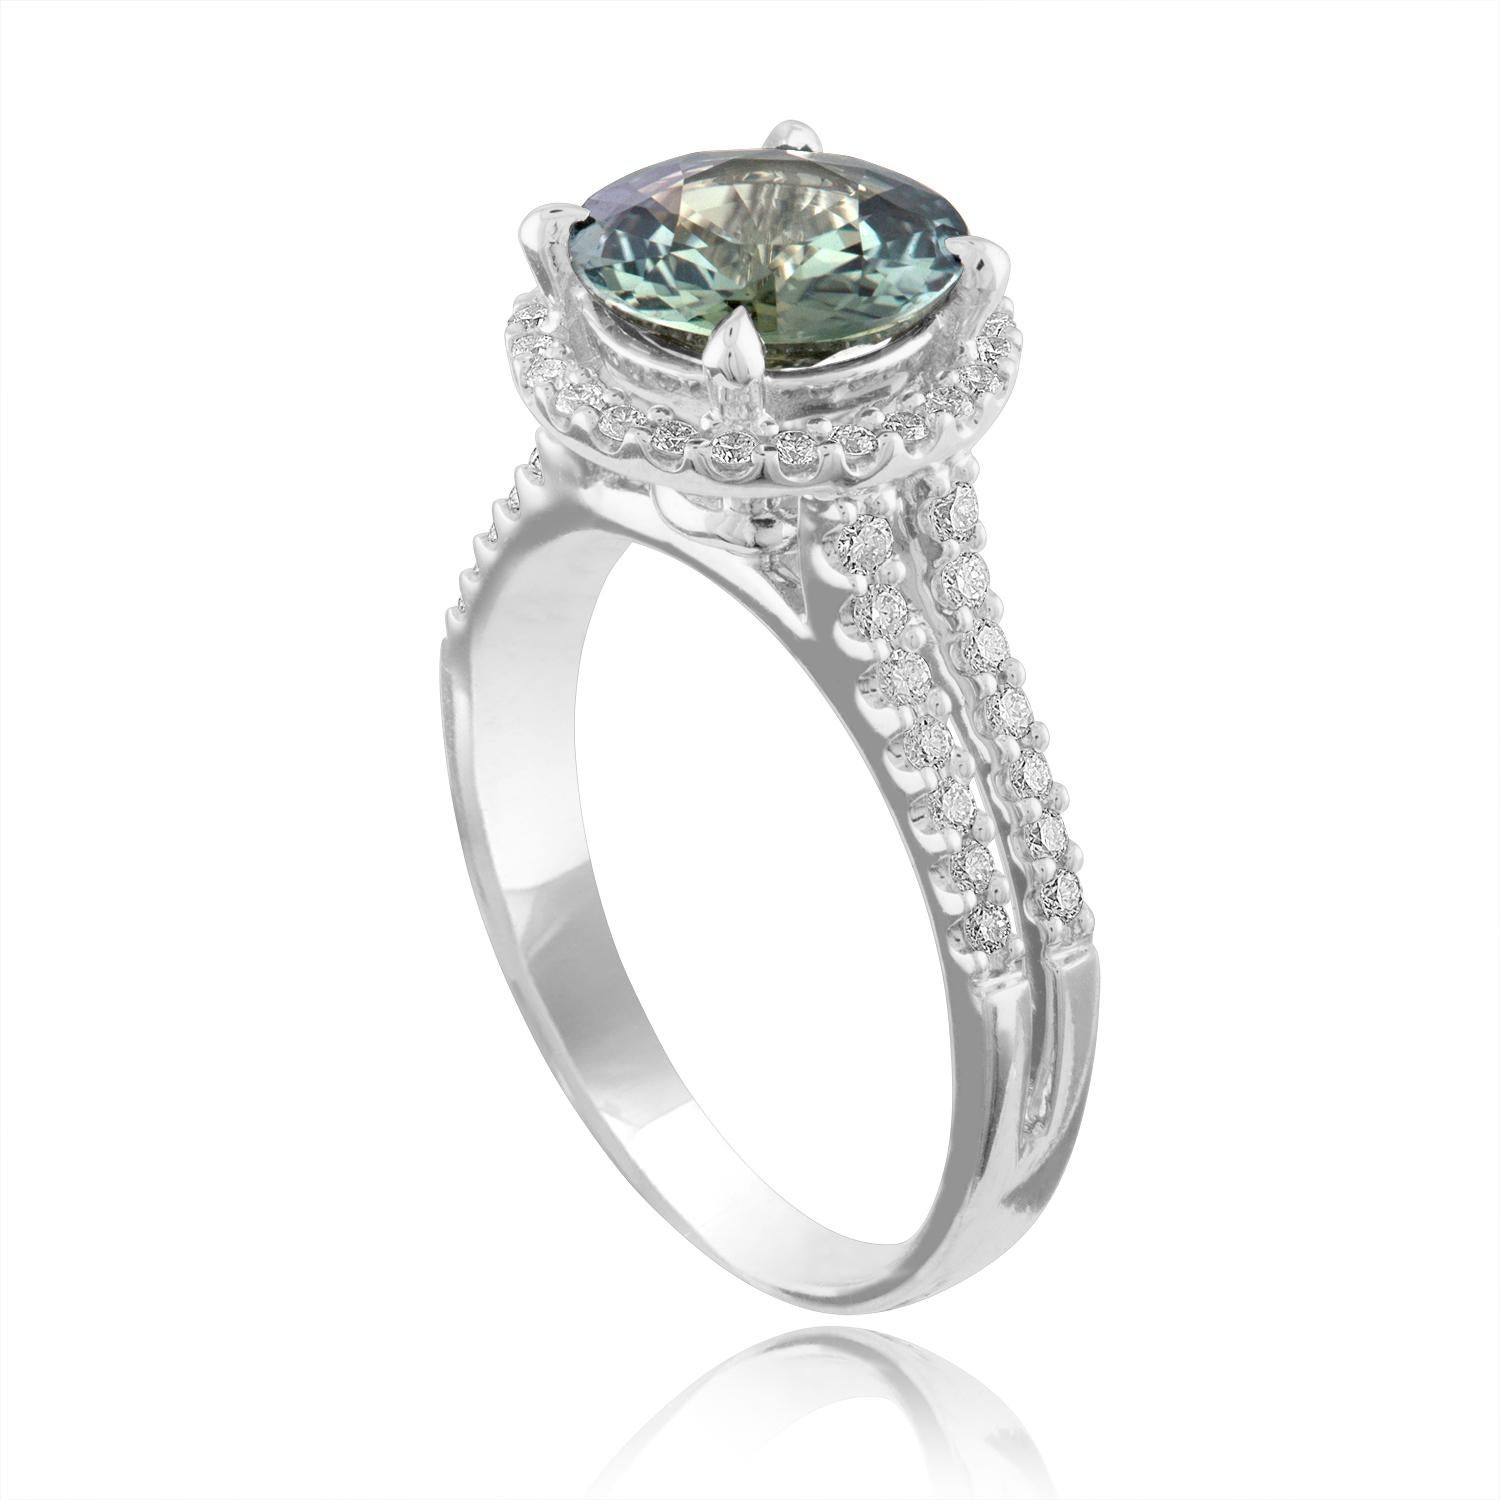 Exquisite Bluish Green Sapphire Halo Ring
The ring is 18K White Gold Ring
The sapphire is a round 2.56 Carats
The sapphire is Bluish Green in color No HEAT
The stone is certified by LAPIS.
The Sapphire changes color depending on light.
There are